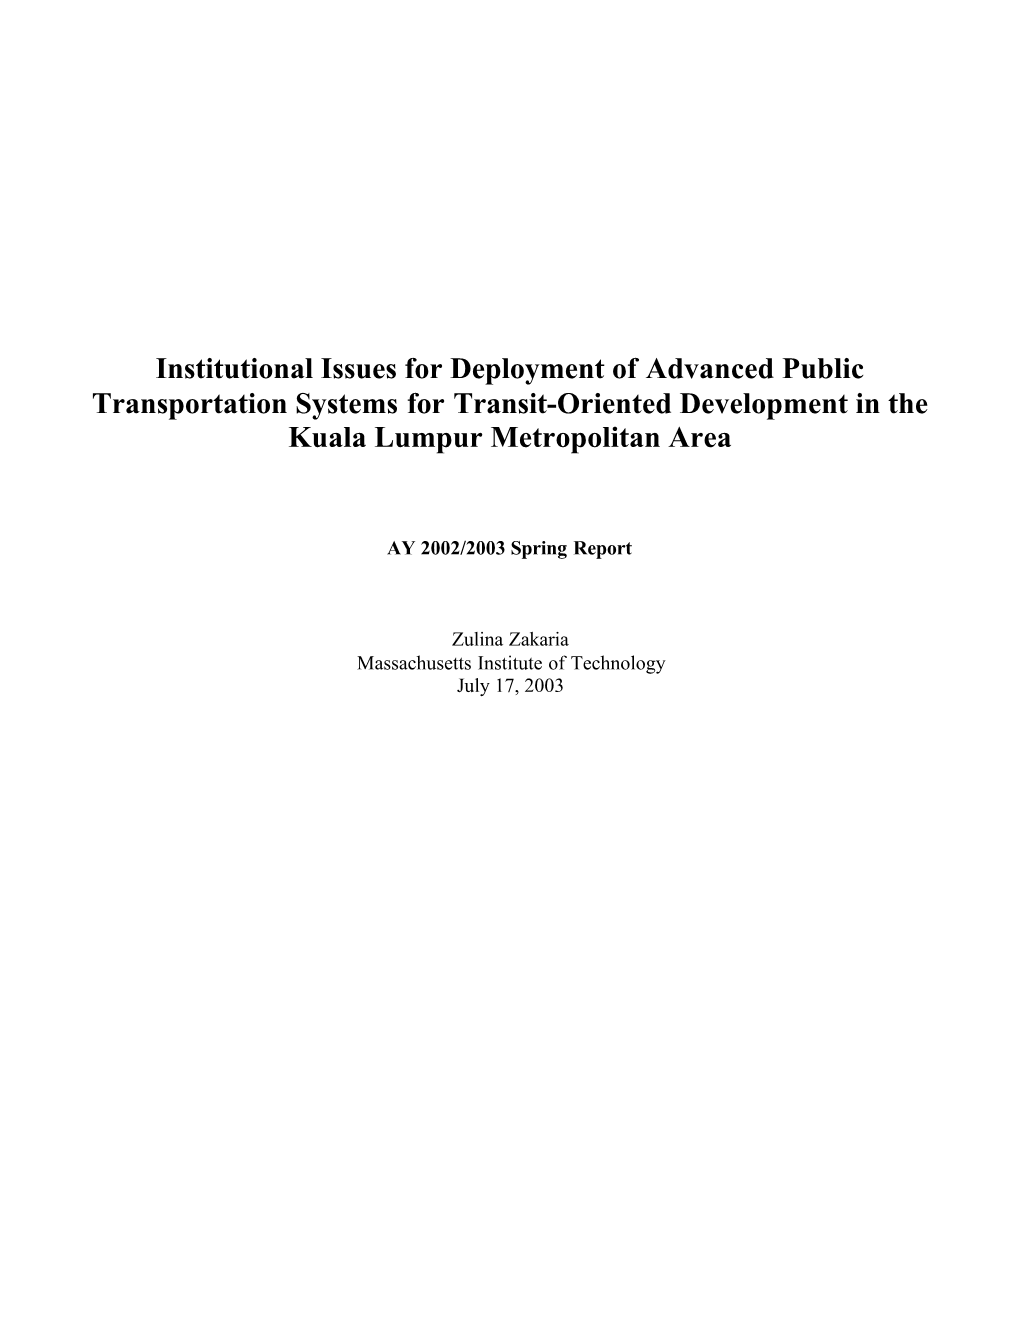 Zakaria 2003 Institutional Issues for Advanced Transit S…